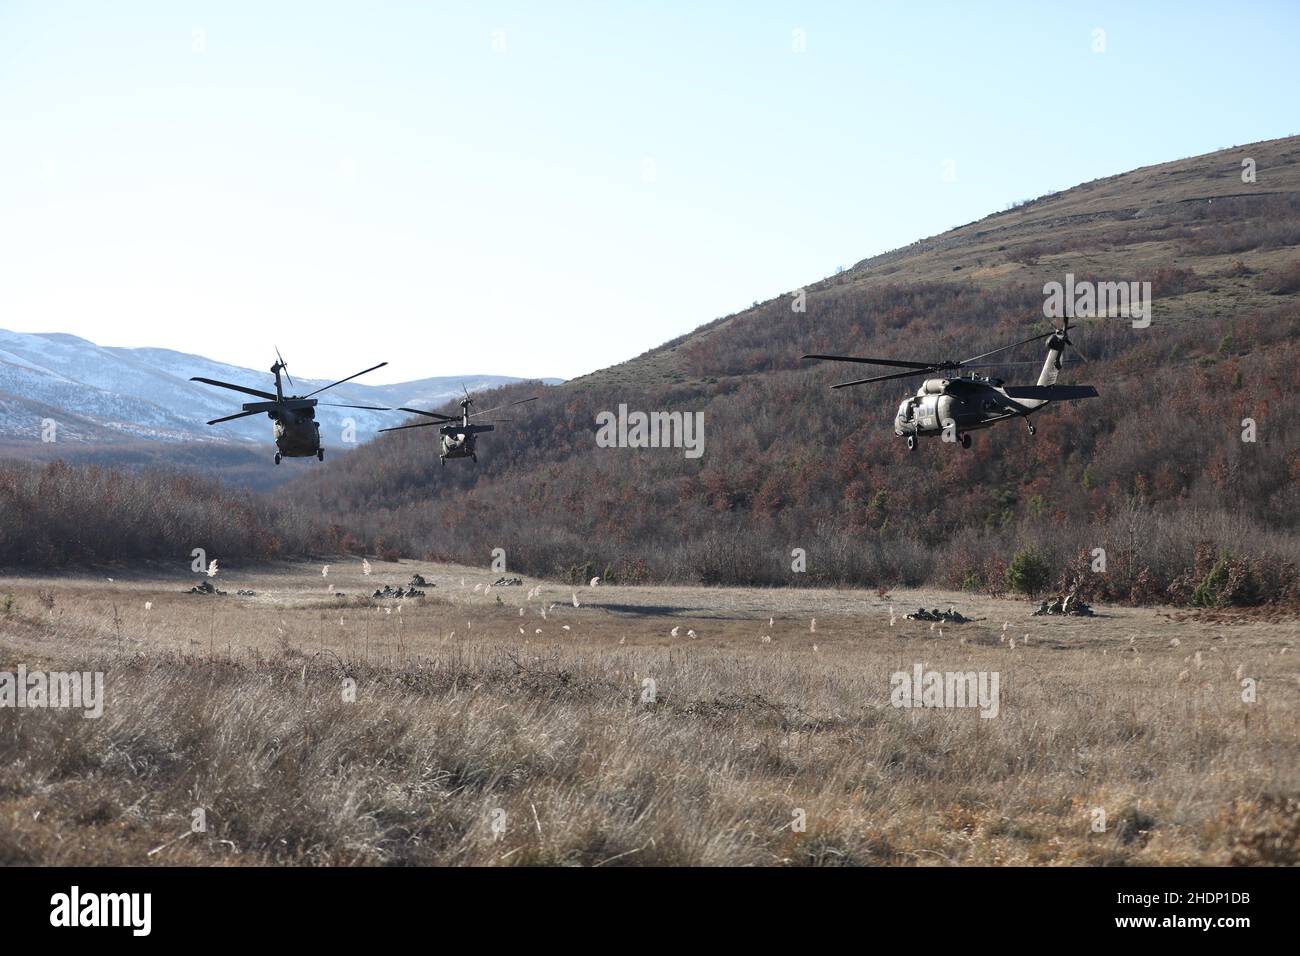 U.S. Army UH-60L Blackhawks belonging to A Company, 1st Battalion 169th Aviation Regiment take off from a landing zone while troopers belonging to 1st Squadron 172nd Cavalry Regiment (Mountain) pull security in the Babaj Boks Training Area, Kosovo December 21, 2021. The soldiers were participating in 'Alpine Swarm', a training exercise to maintain readiness for all contingencies while enhancing multi-national interoperability. This image was electronically cropped and ethically enhanced to emphasize the subject and does not misrepresent the subject or the original image in any way. (U.S. Army Stock Photo